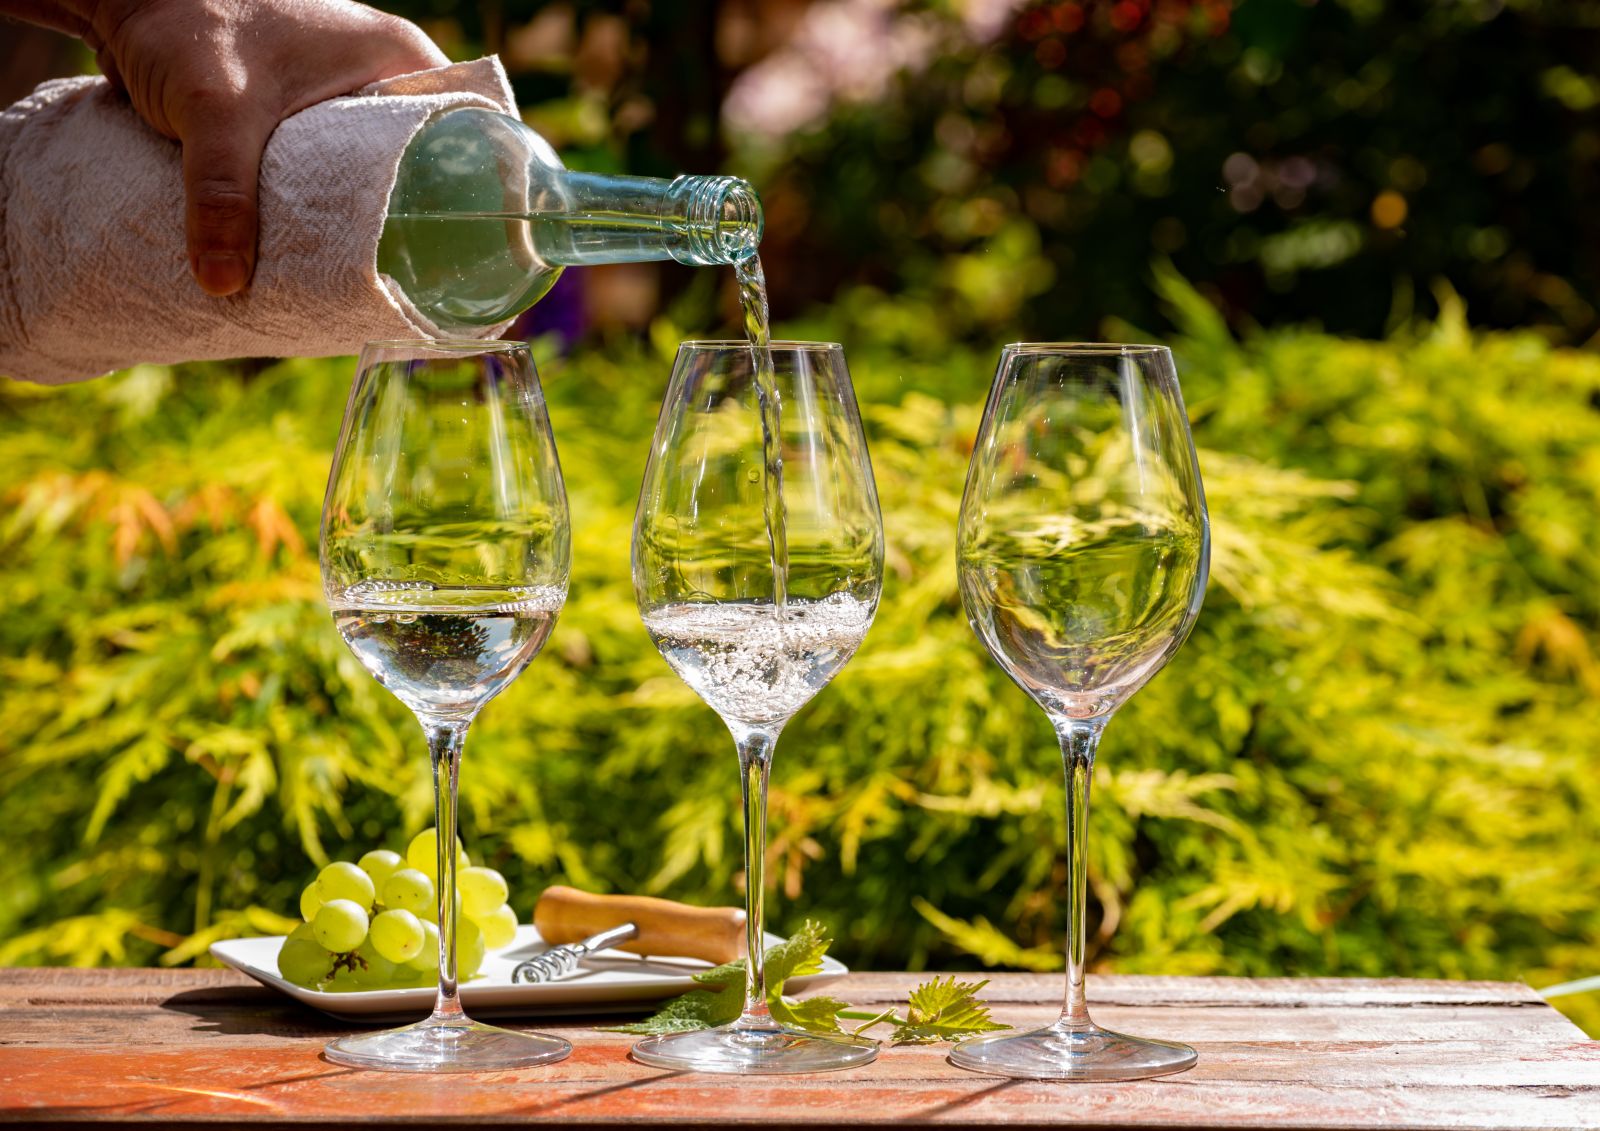 Glasses of white wine being poured in a vineyard setting in Australia